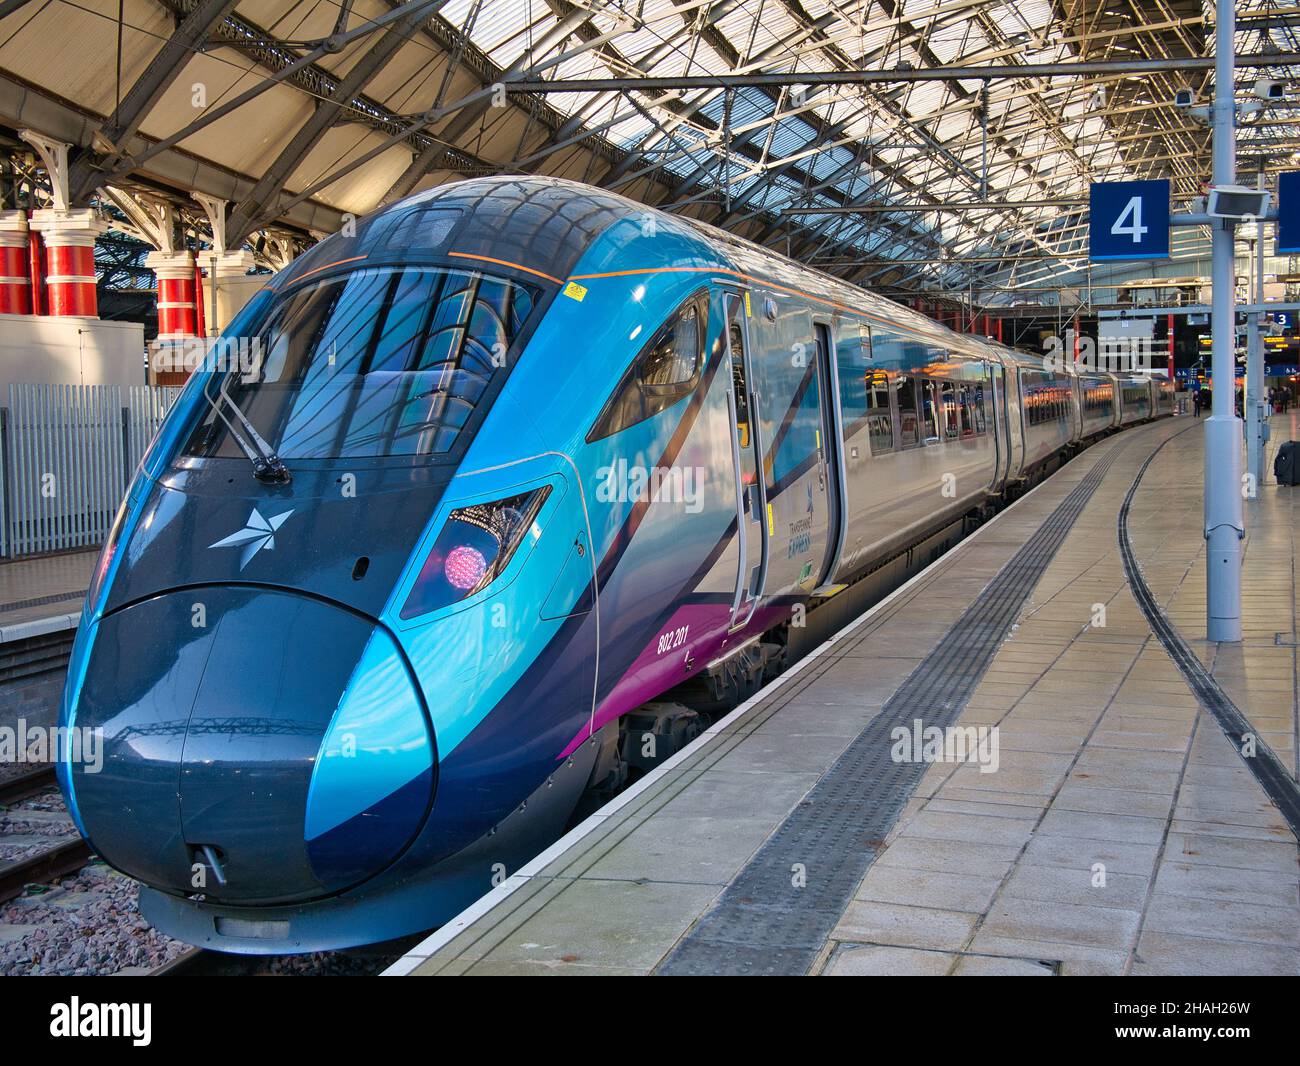 The engine of a TransPennine Express train at Lime Street Station in Liverpool, UK. The train is waiting for passengers to arrive before departing for Stock Photo